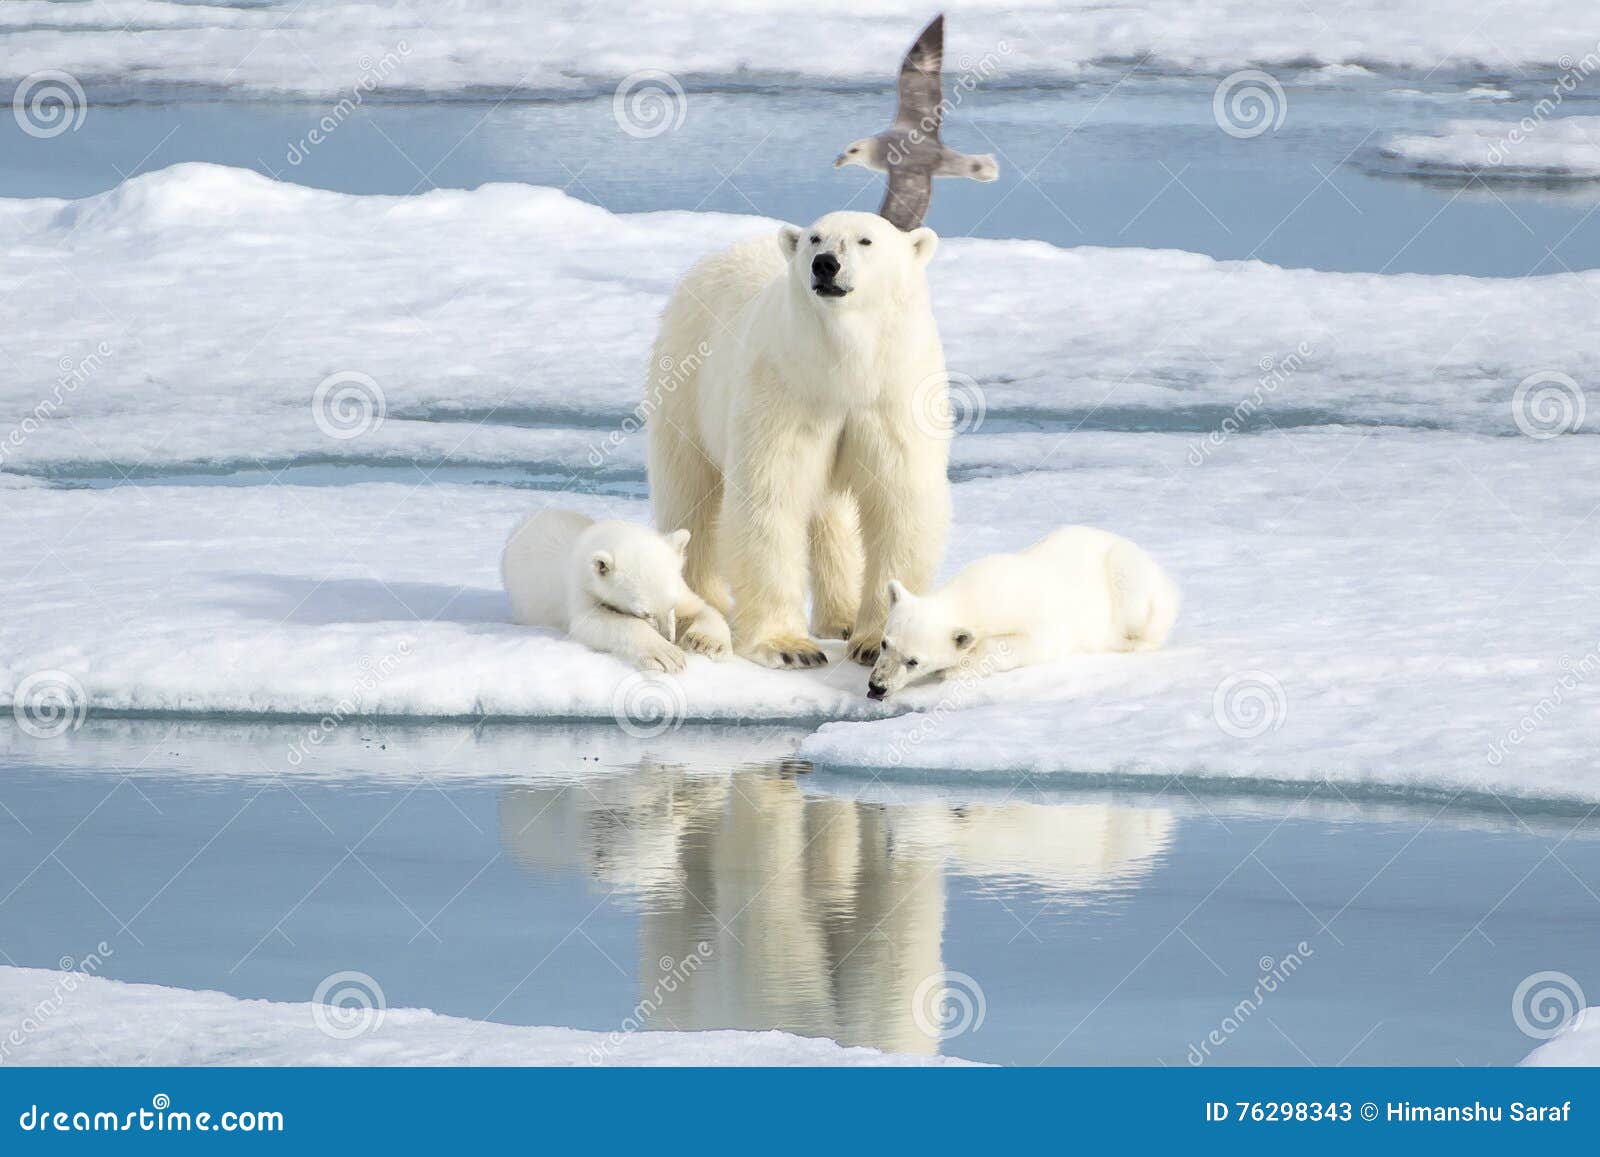 mother polar bear and two cubs on sea ice